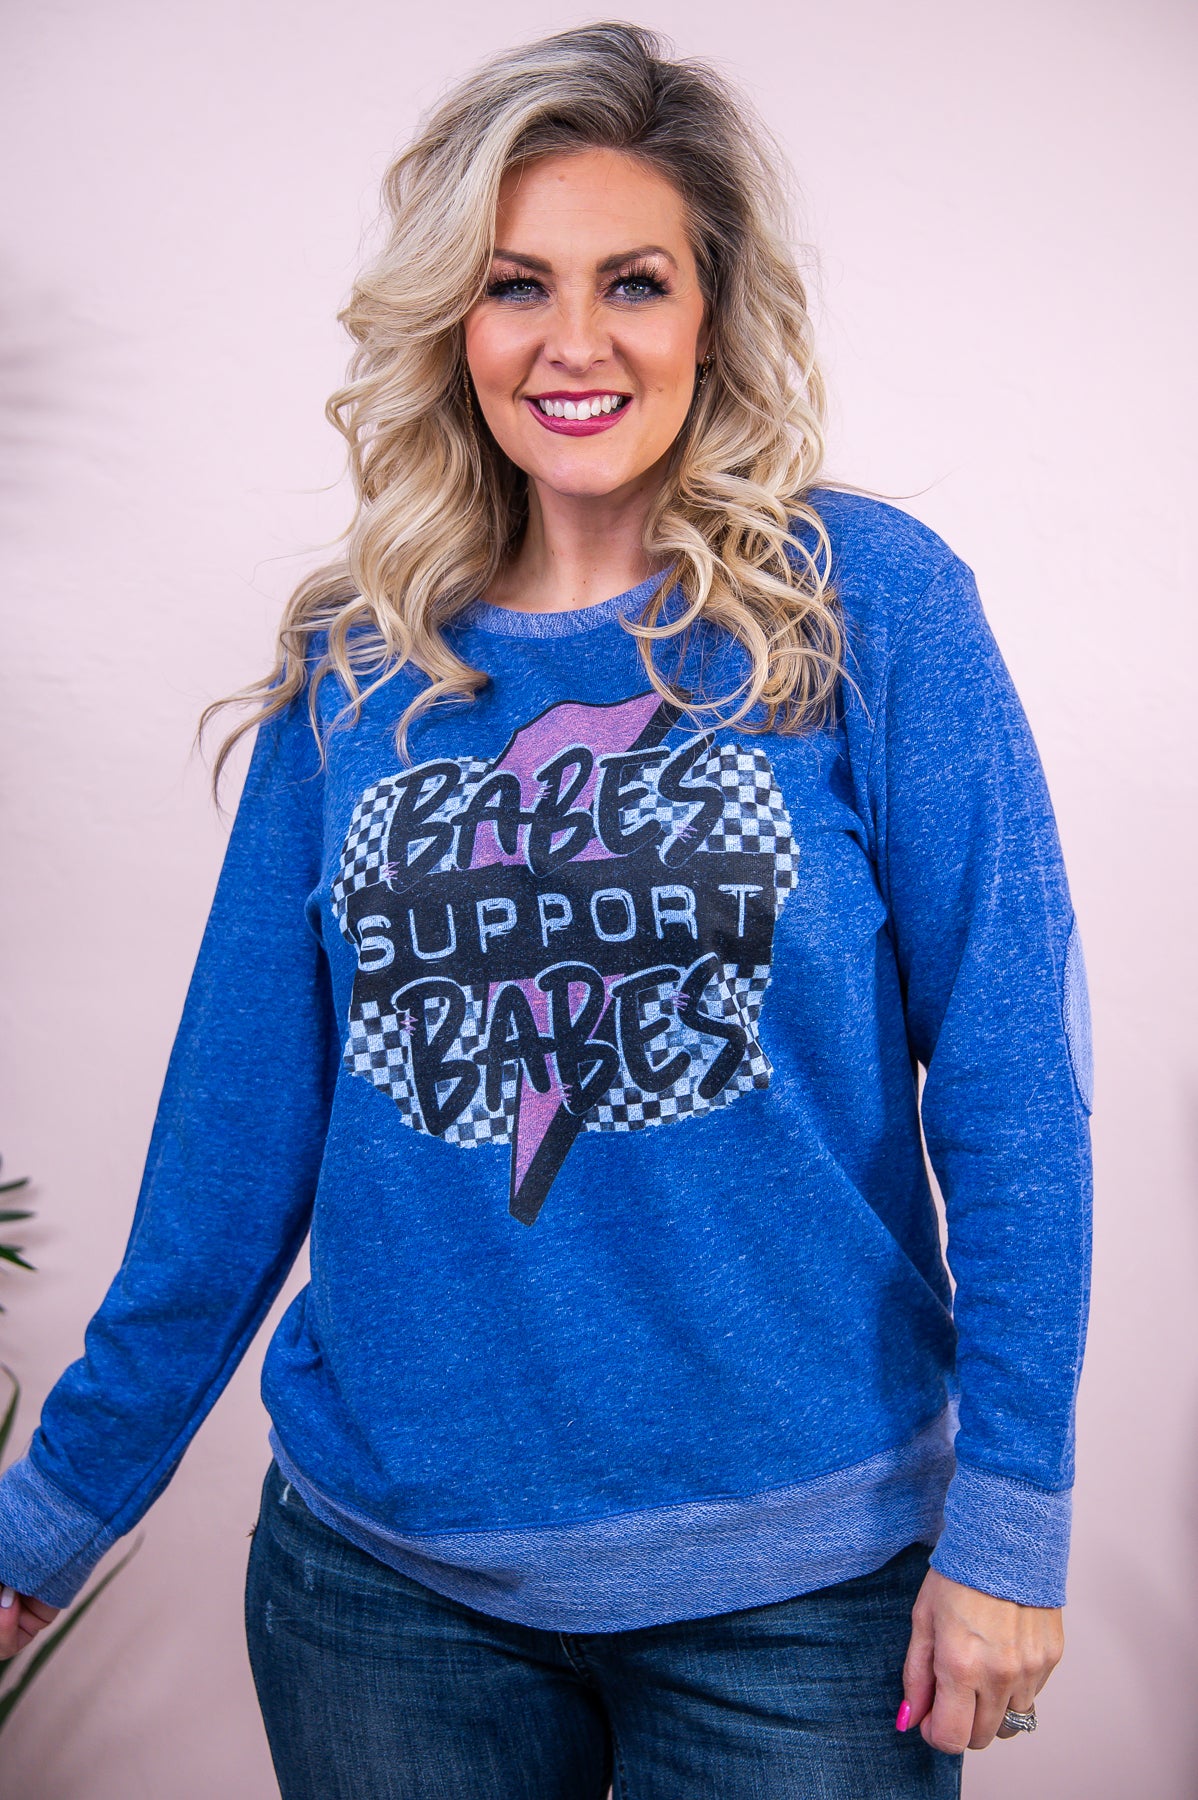 Babes Support Babes Royal Melange Graphic Sweatshirt - A3208RM